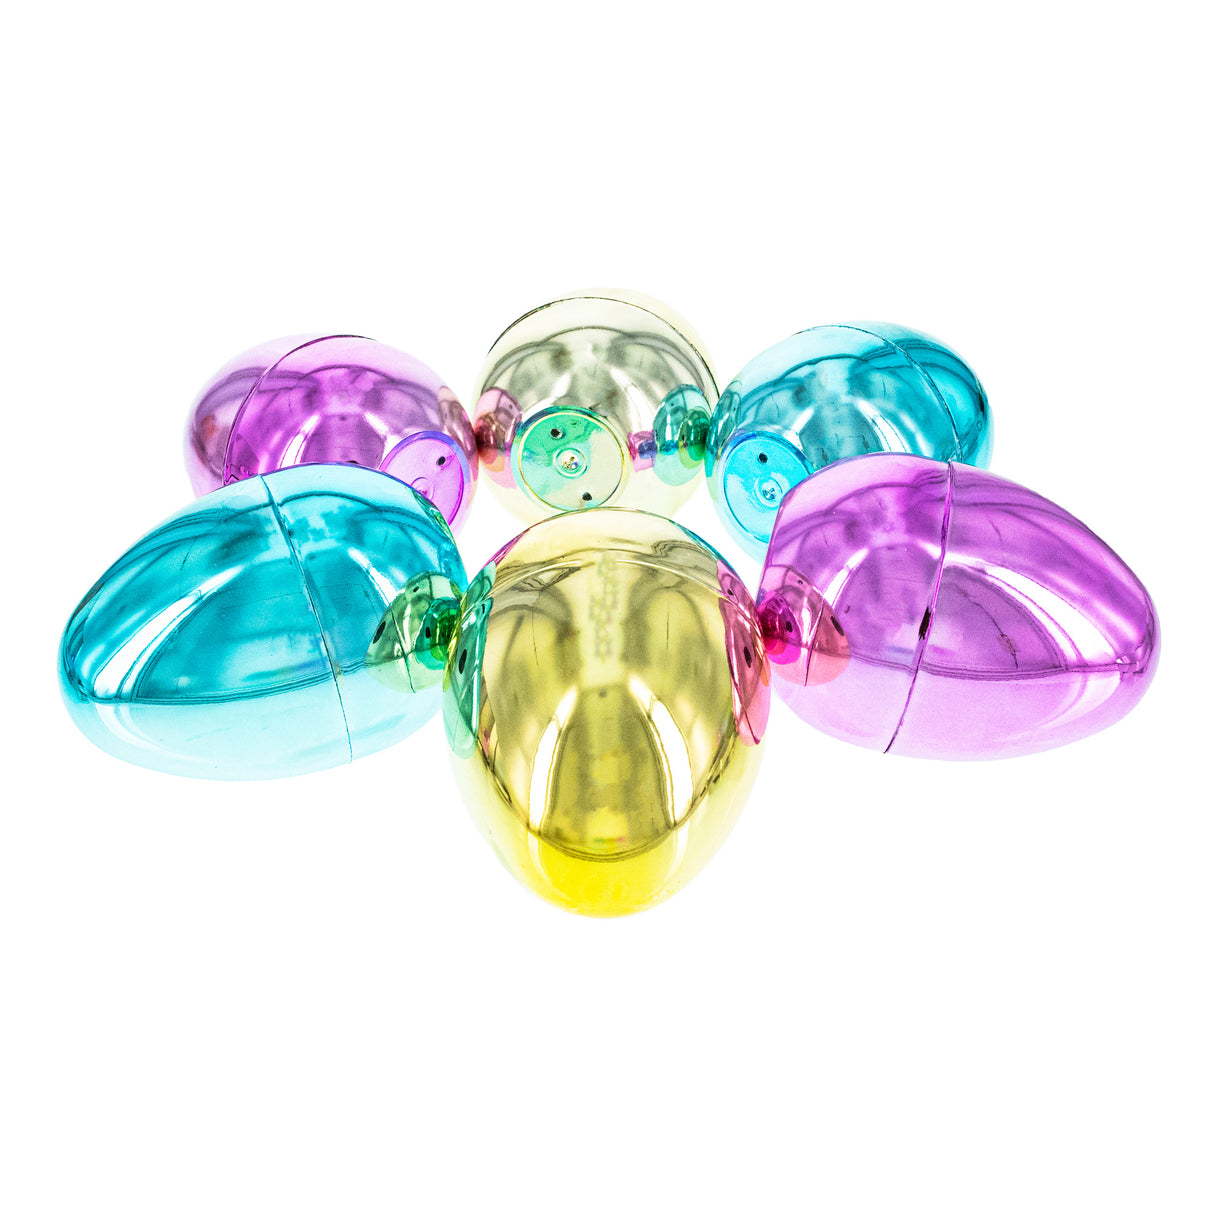 Easter Shine and Surprise: Set of 6 Large Fillable Multicolored Metallic Plastic Easter Eggs 4 Inches ,dimensions in inches: 4 x  x 2.95